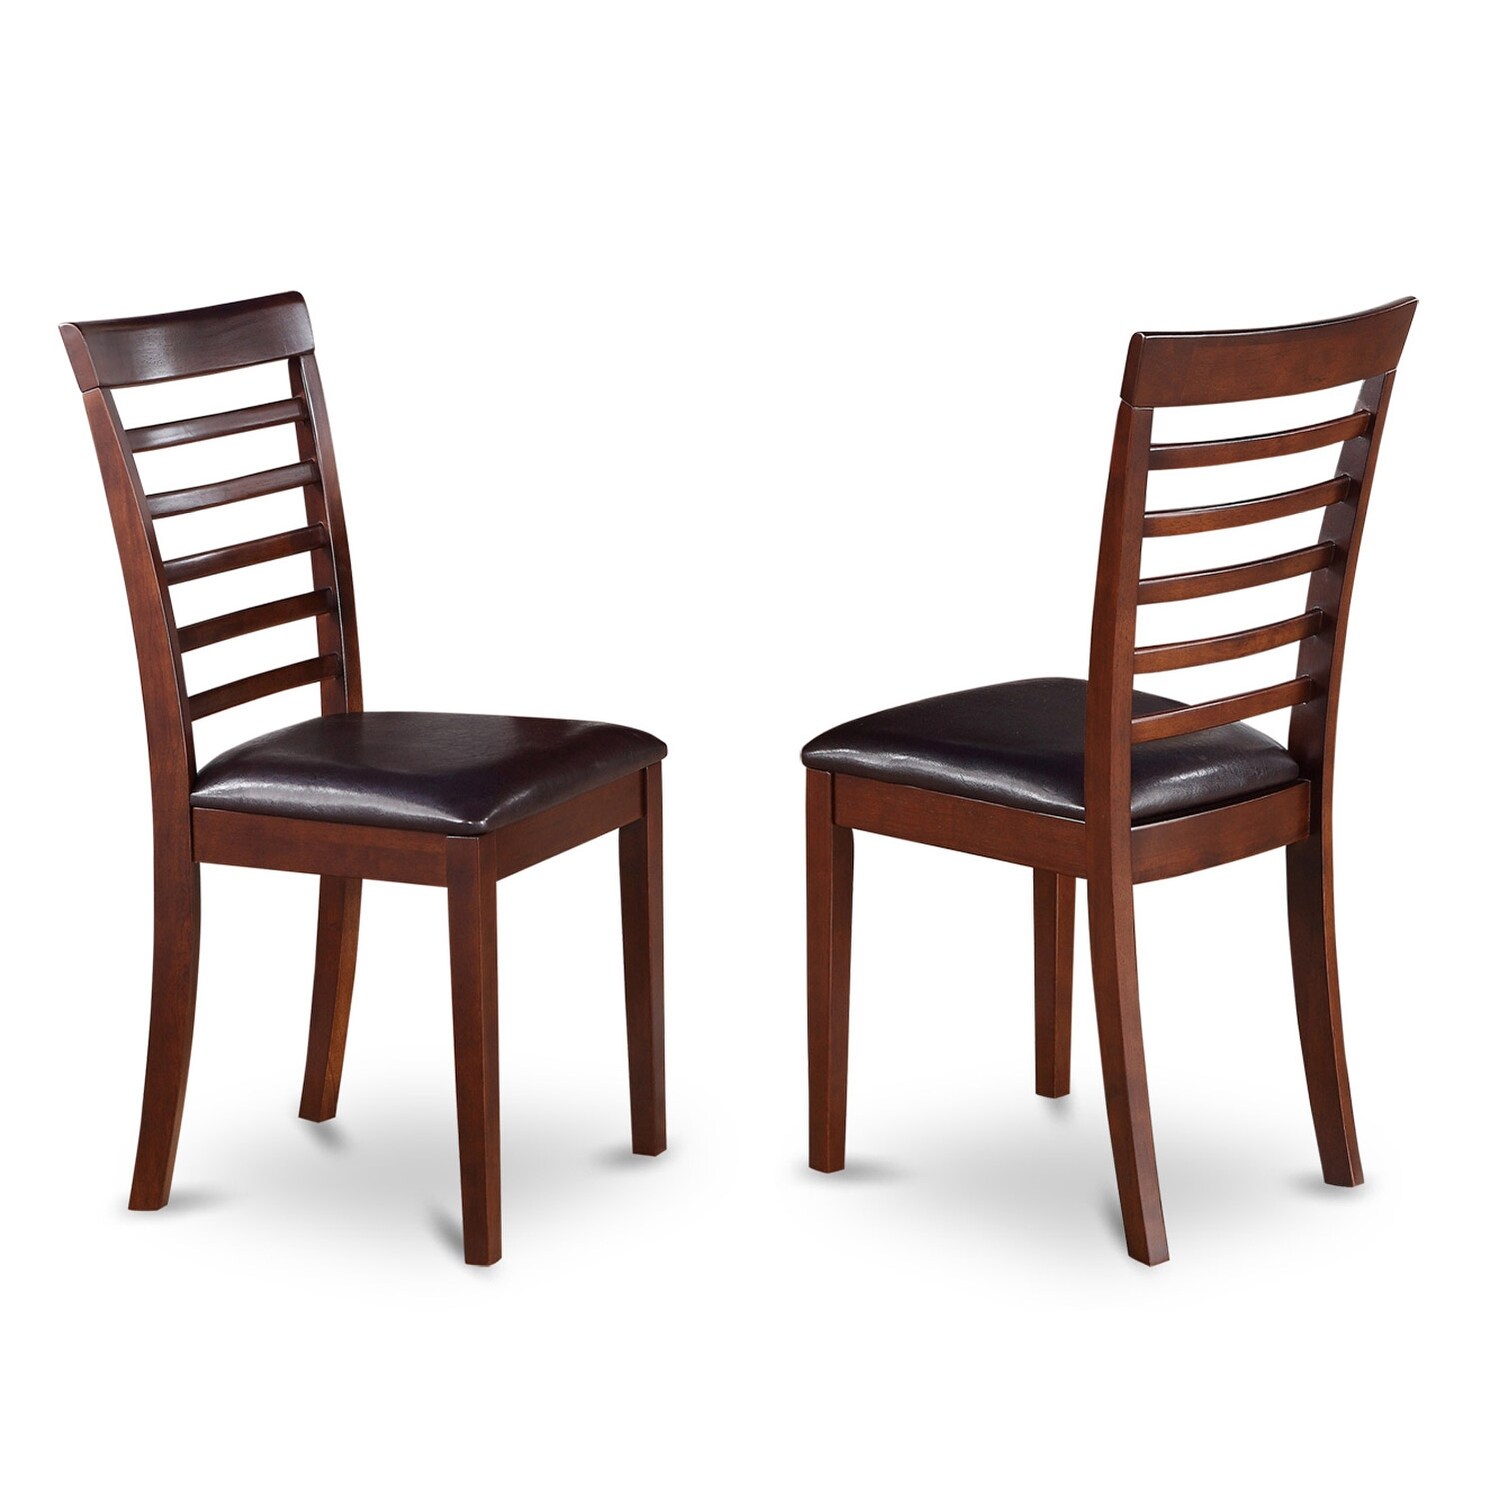 East West Furniture Milan Kitchen Dining Chairs - Ladder Back Dining Room Chairs, Set of 2, Mahogany (Seat Type Options)